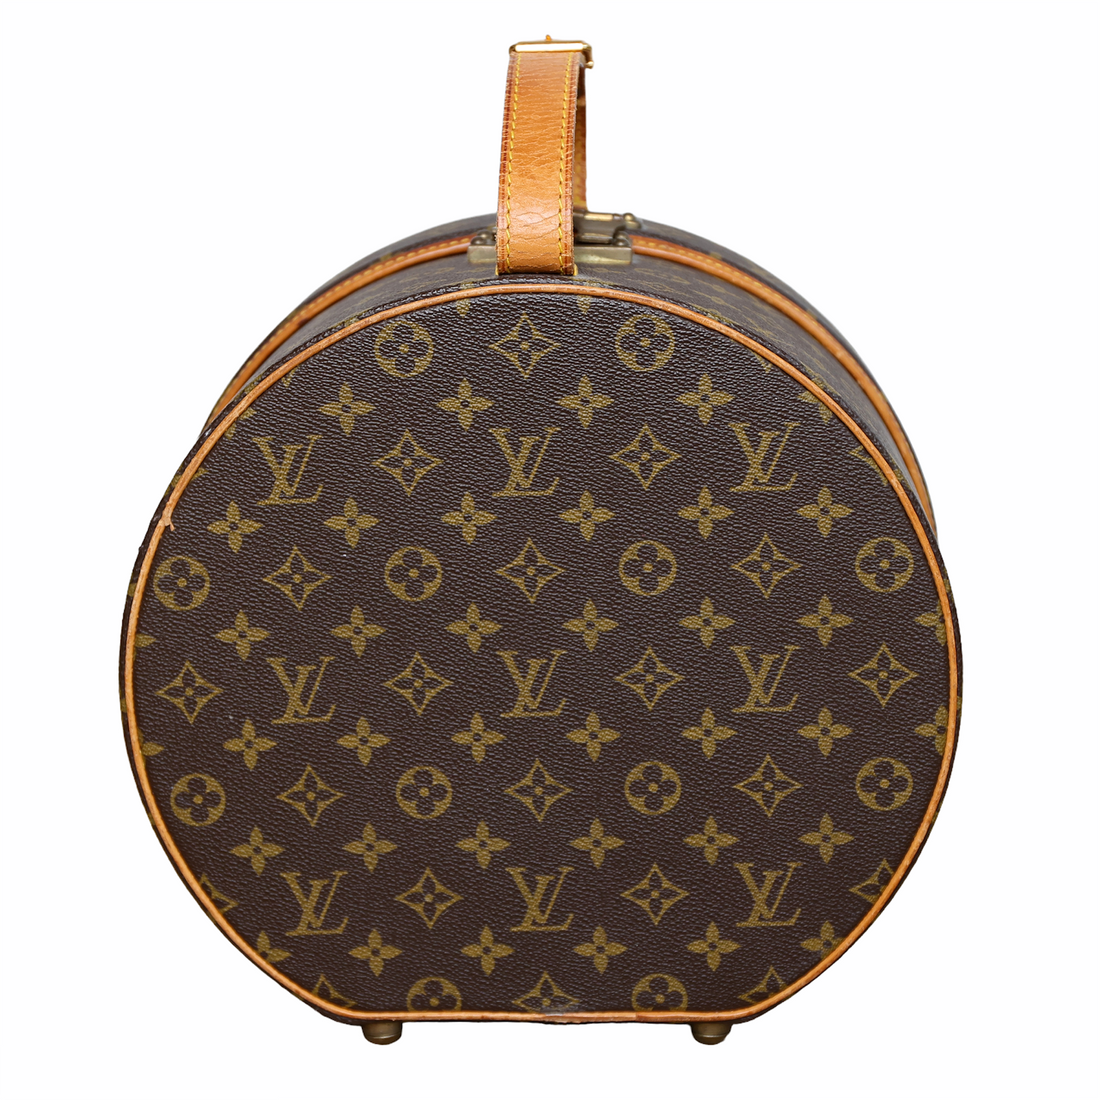 Vintage Louis Vuitton hat box {the dream} - I just want it just to